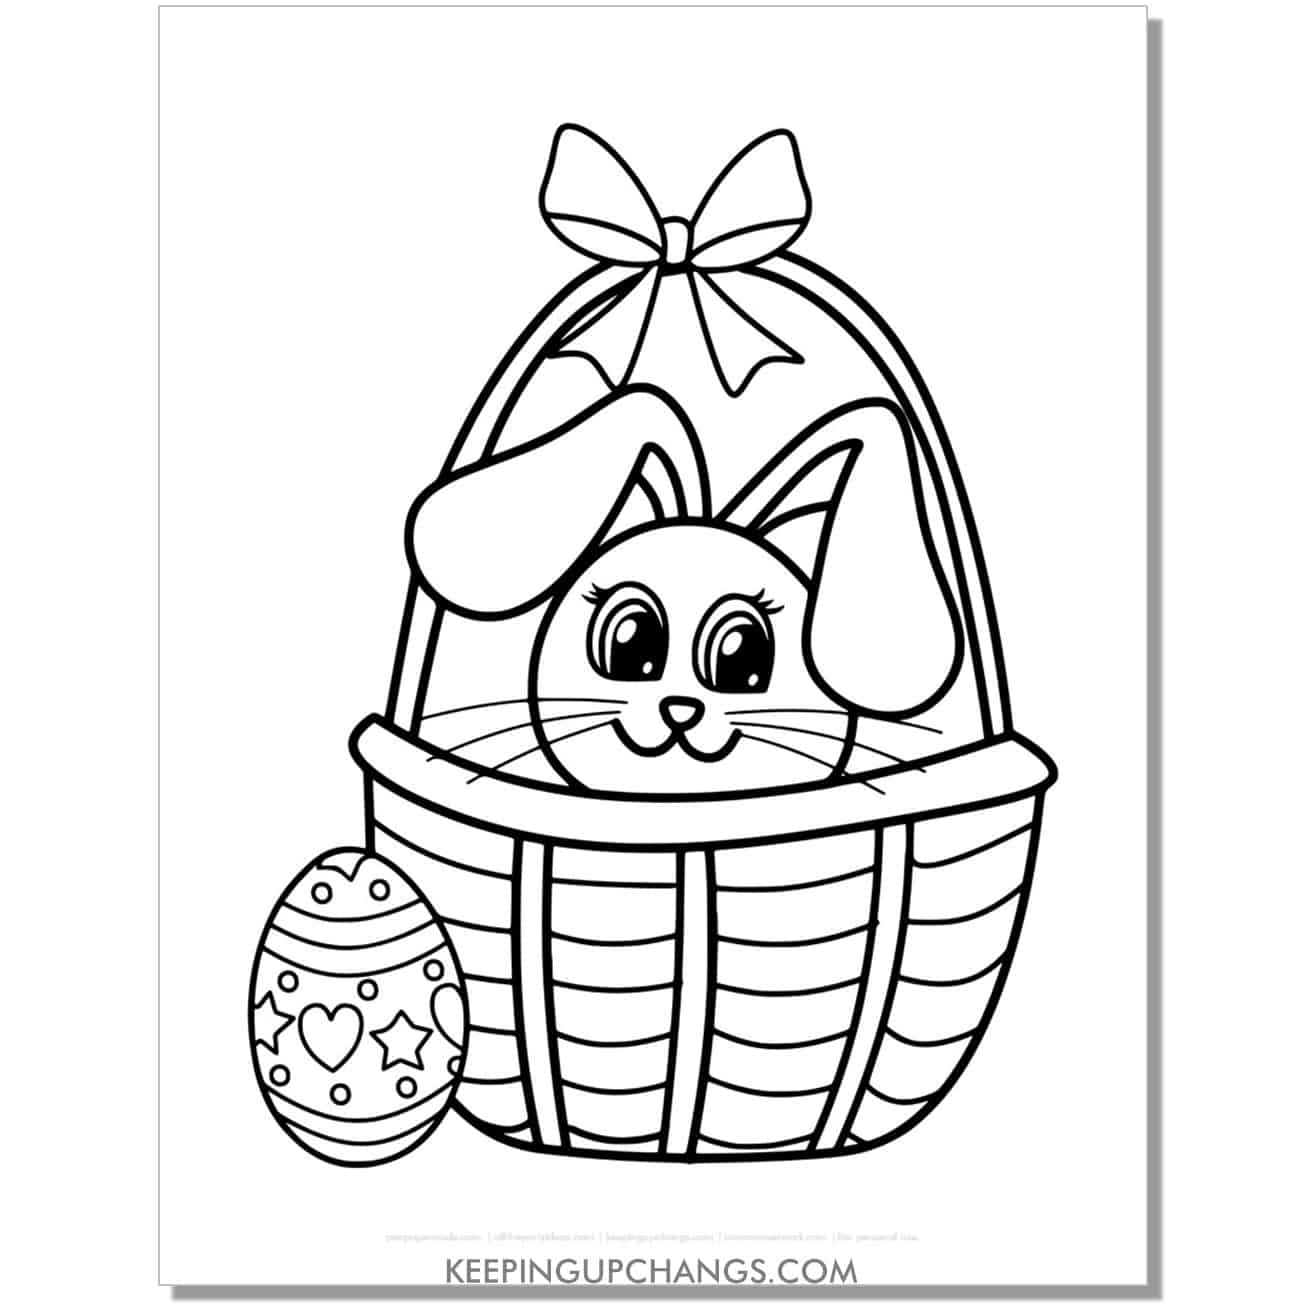 kawaii easter bunny sitting in basket coloring page, sheet.